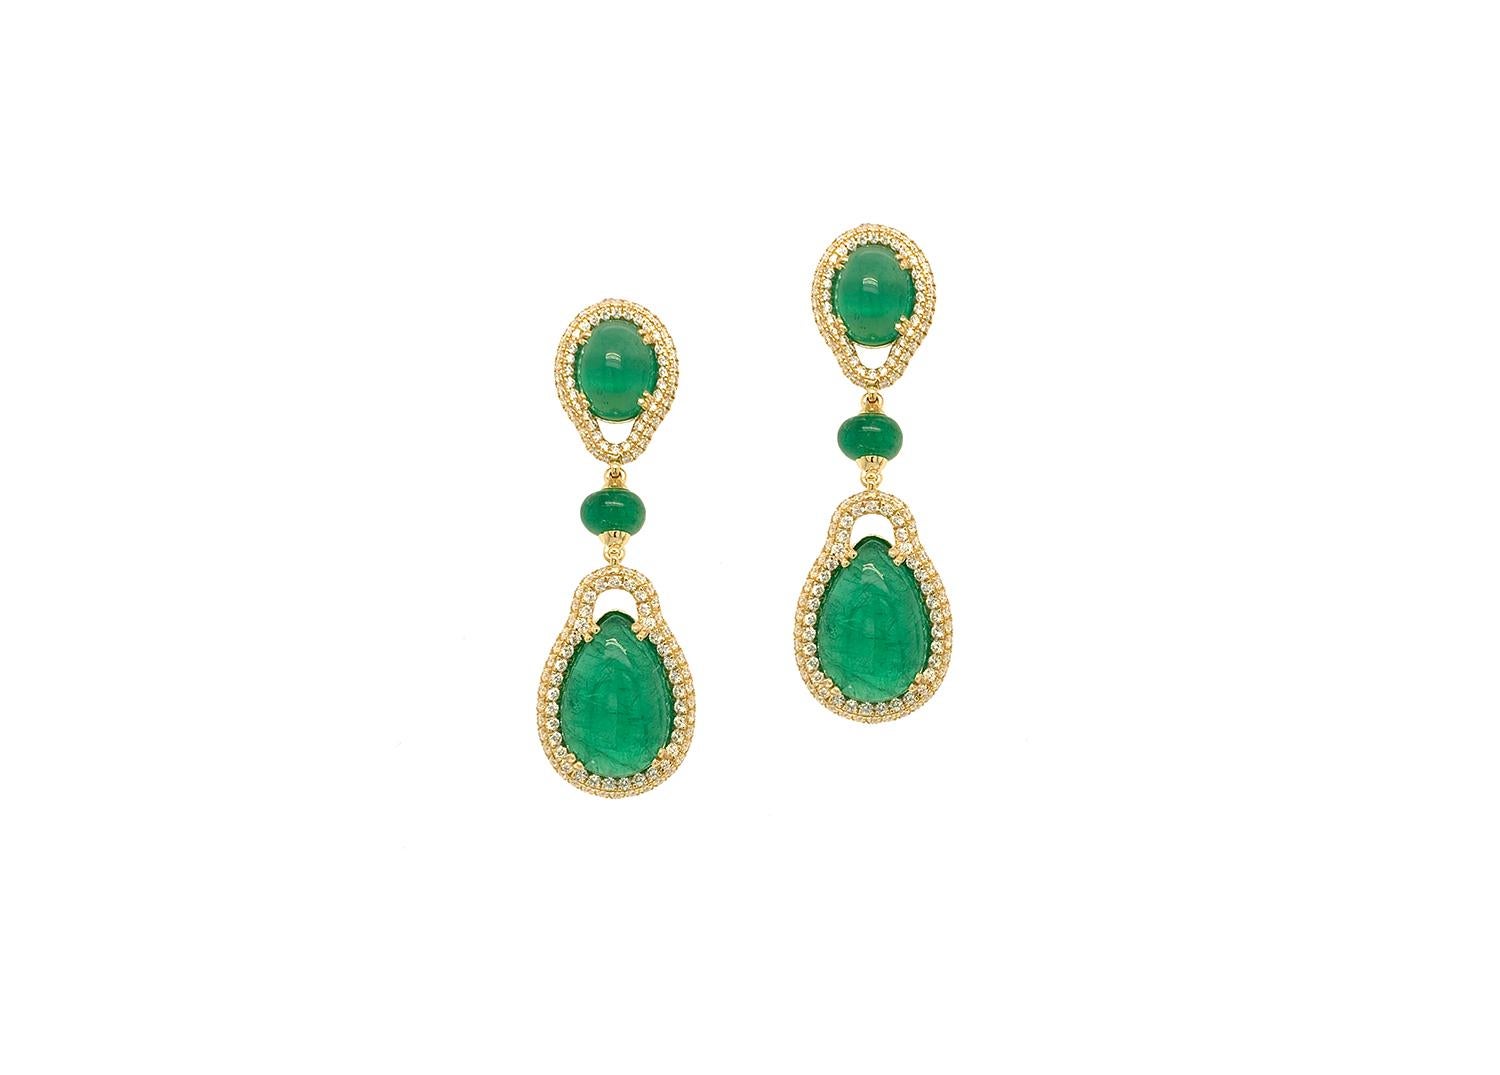  Emerald Pear Cabs and Emerald Round Beads Earring with Diamonds in 18k Yellow Gold from 'G-One' Collection

Gemstone Weight: Emerald- 17.69 Carats

Diamond: G-H / VS, Approx Wt: 1.46 Carats